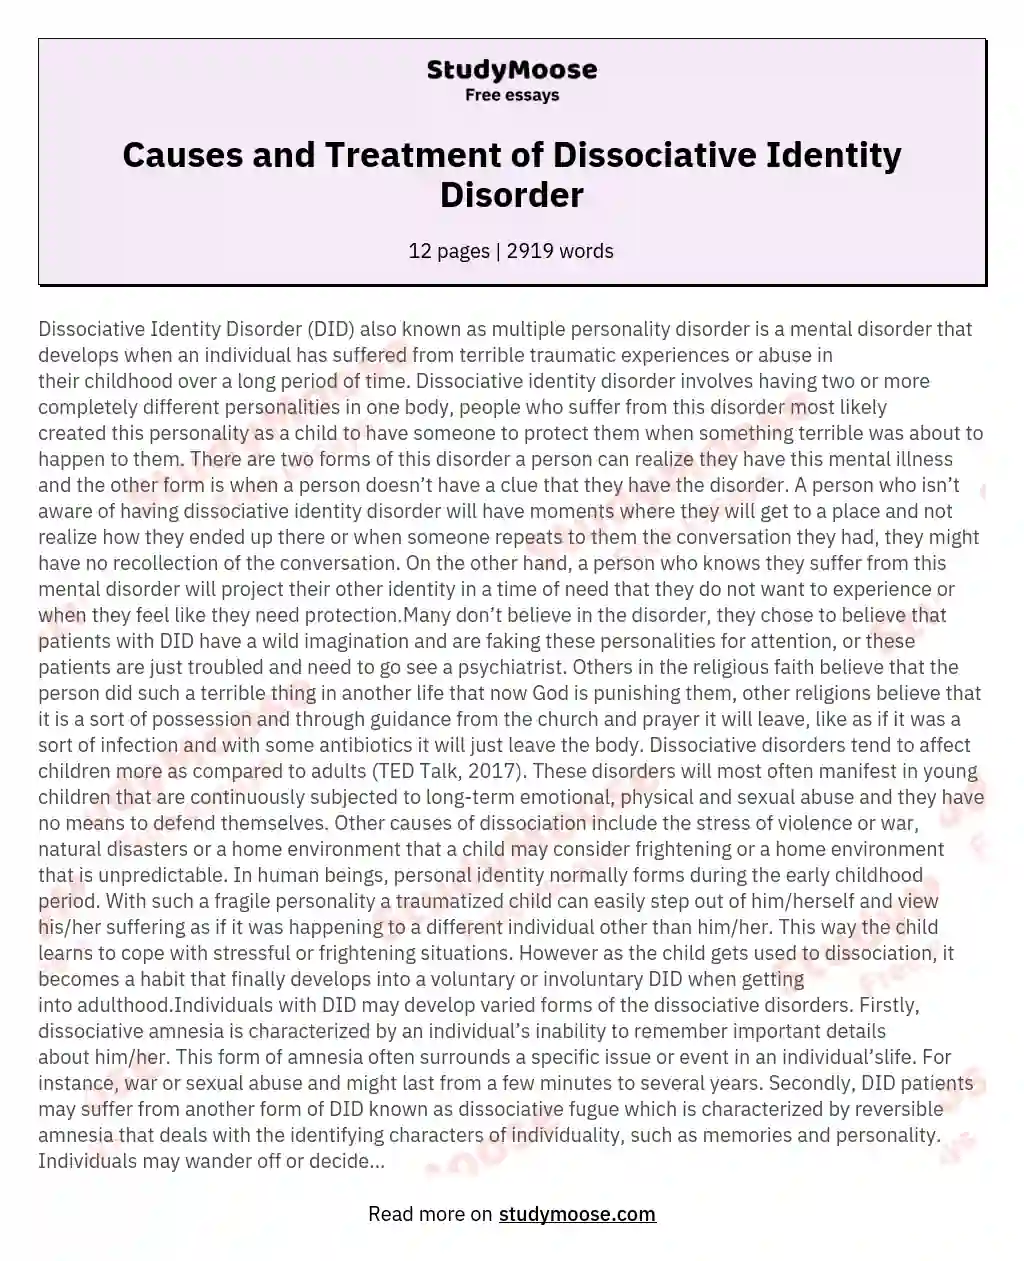 Causes and Treatment of Dissociative Identity Disorder essay